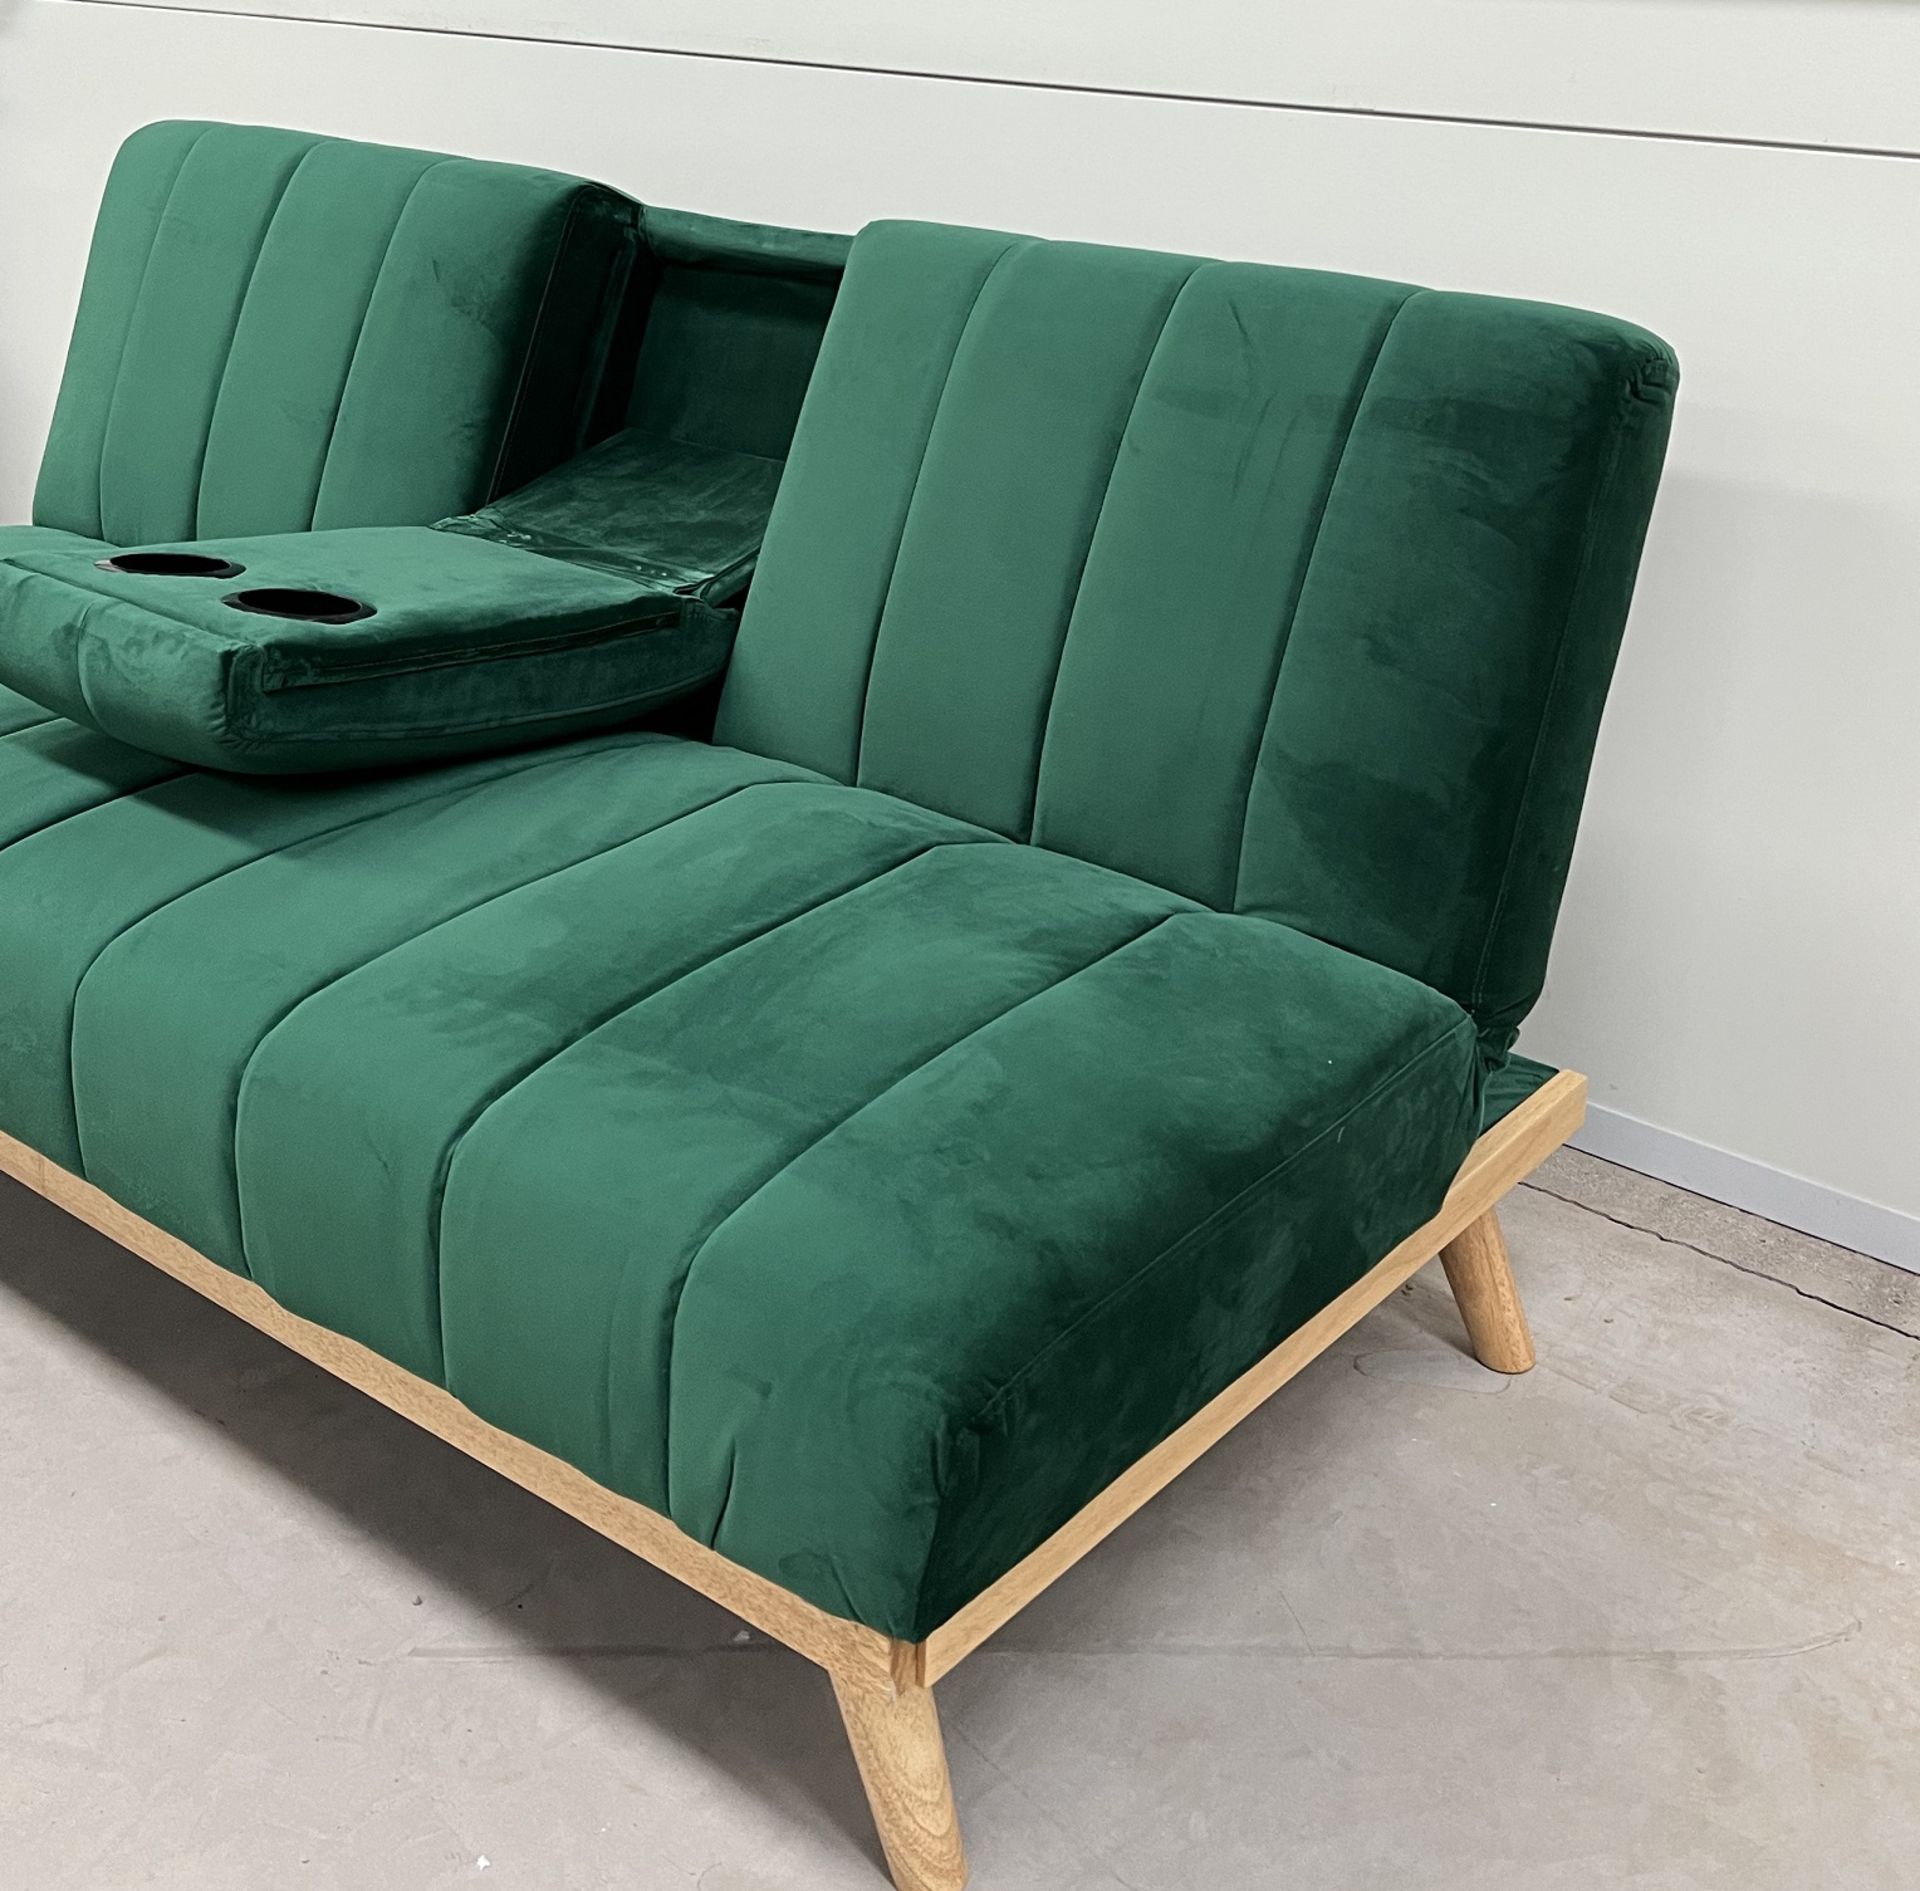 Etta Green Plush Velvet Sofa Bed Defined By It's Soft Curves And Low Rise Design As Well As Subtle - Image 3 of 3